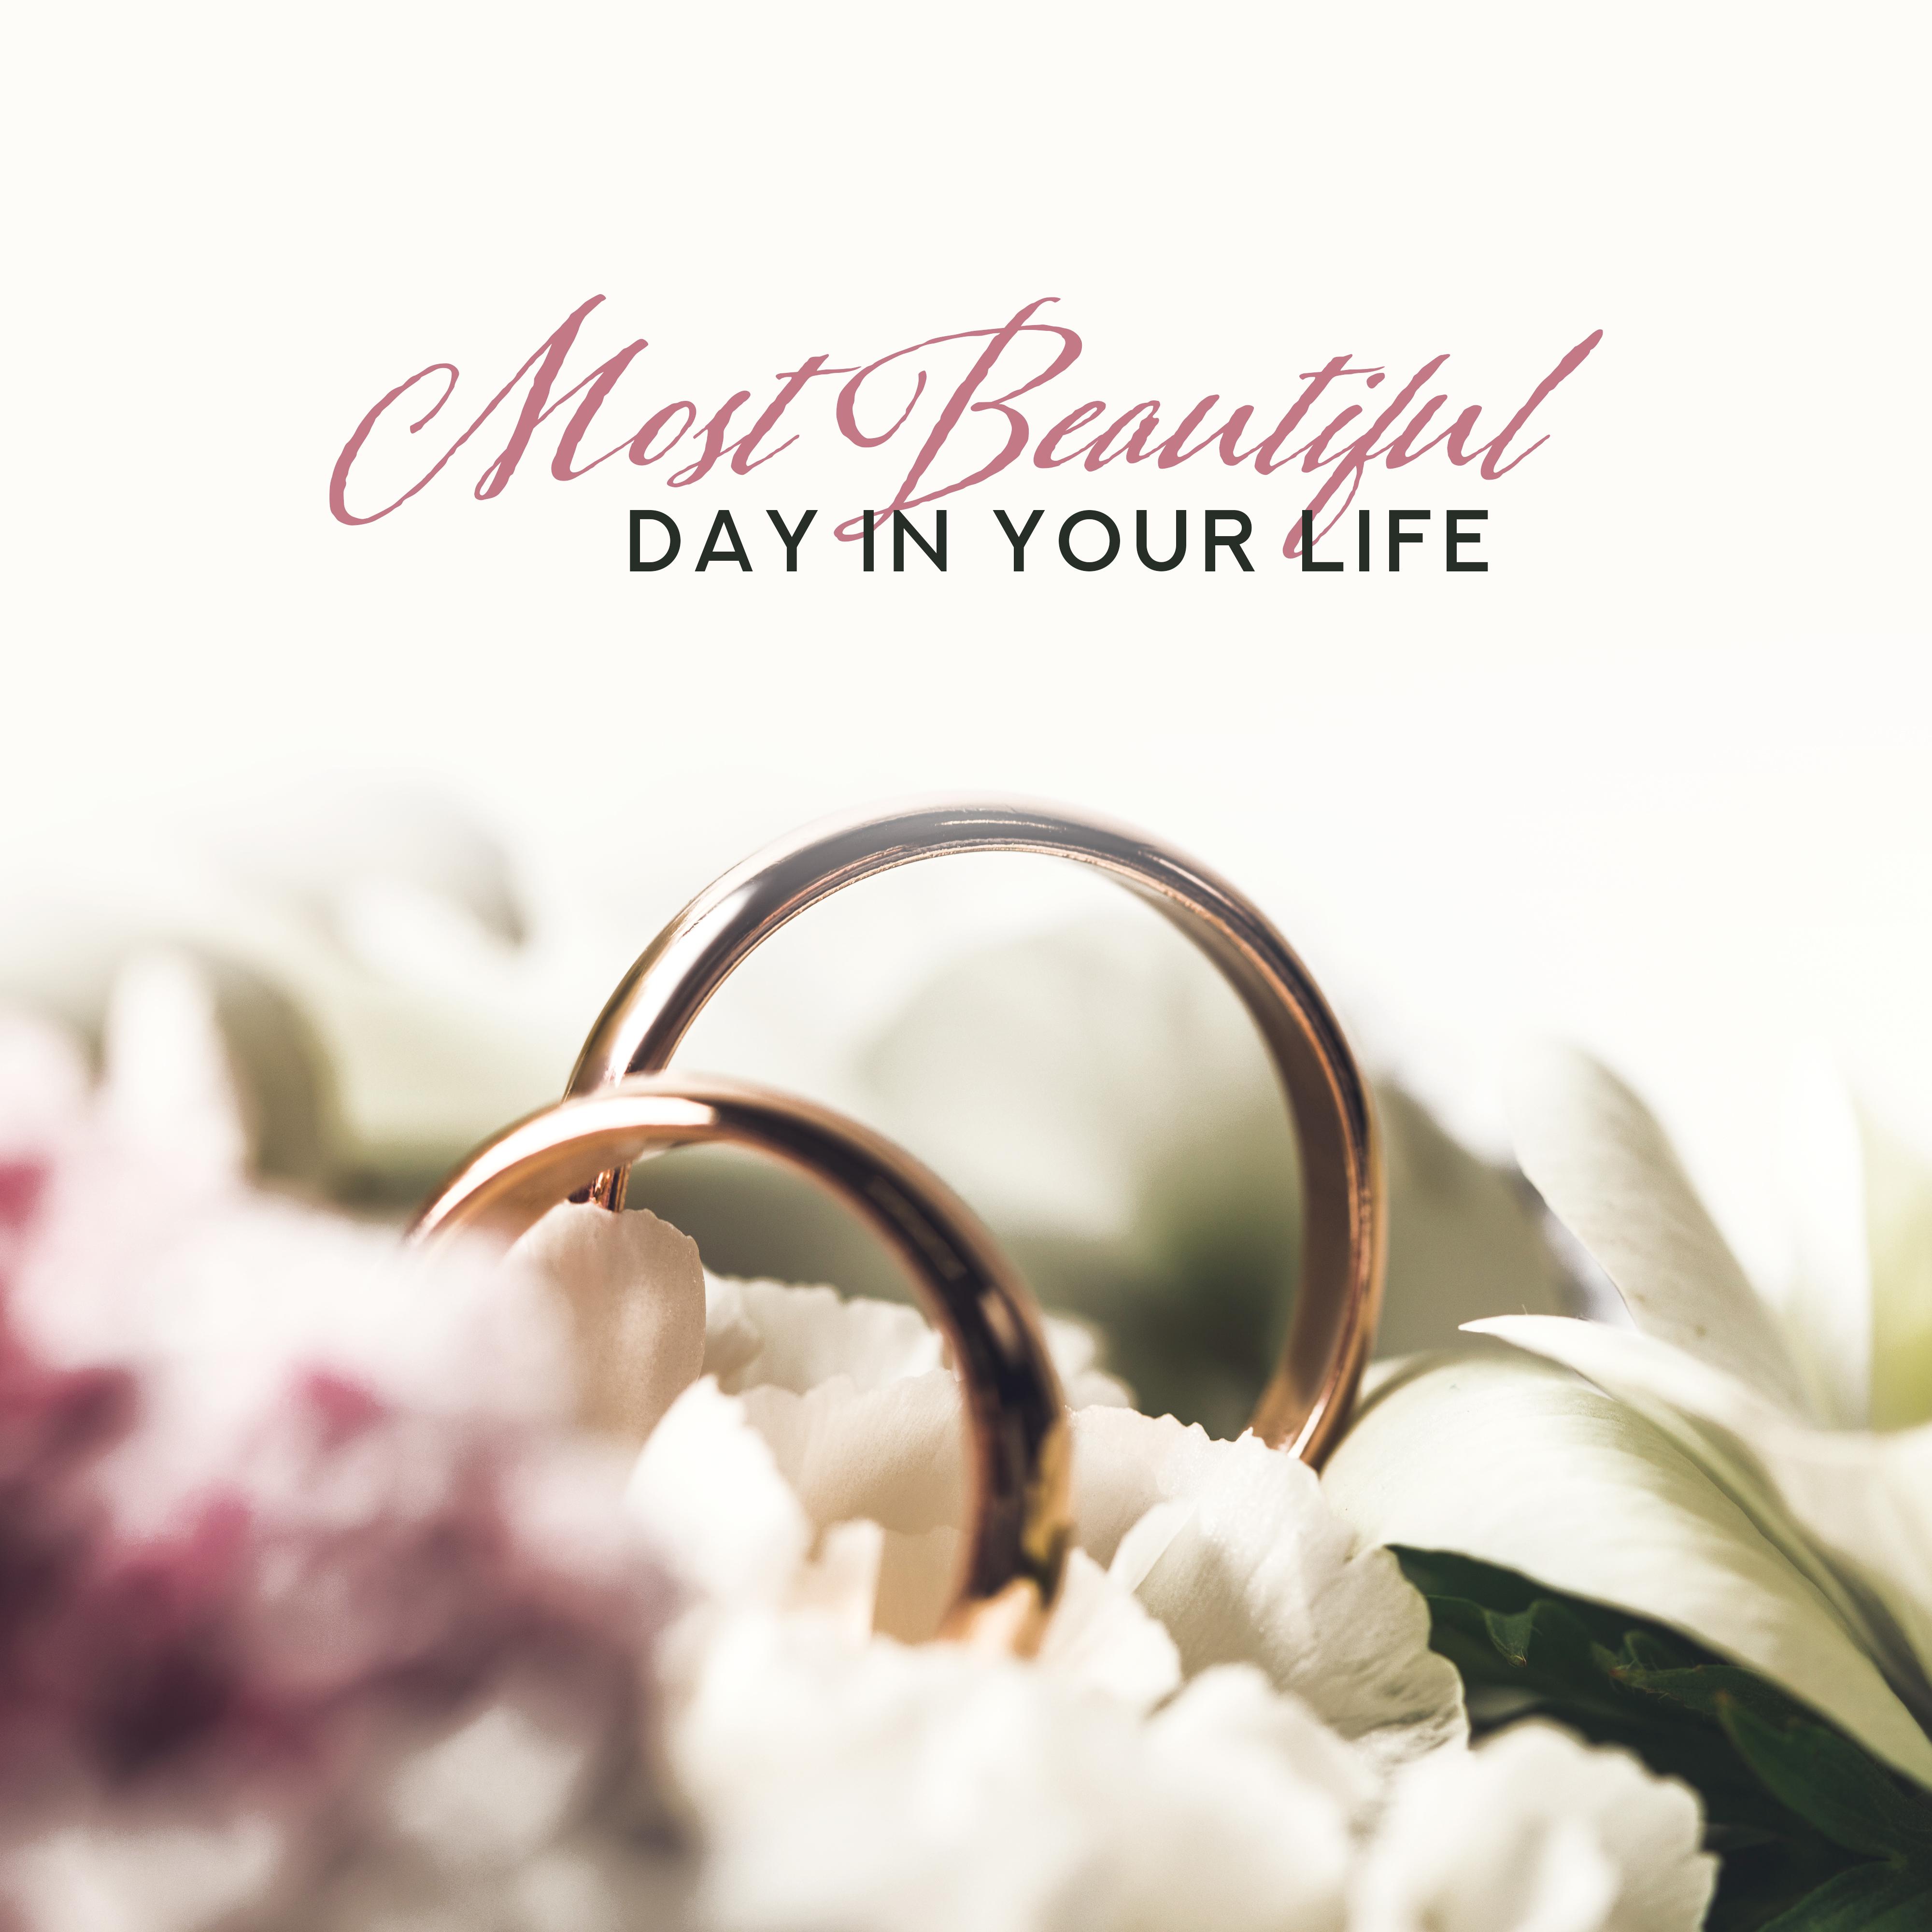 Most Beautiful Day in Your Life: 2019 Perfect Piano Jazz Melodies for Wedding Day, Soft Music for Bride and Groom First Dance, Slow Songs for Celebration of New Marriage